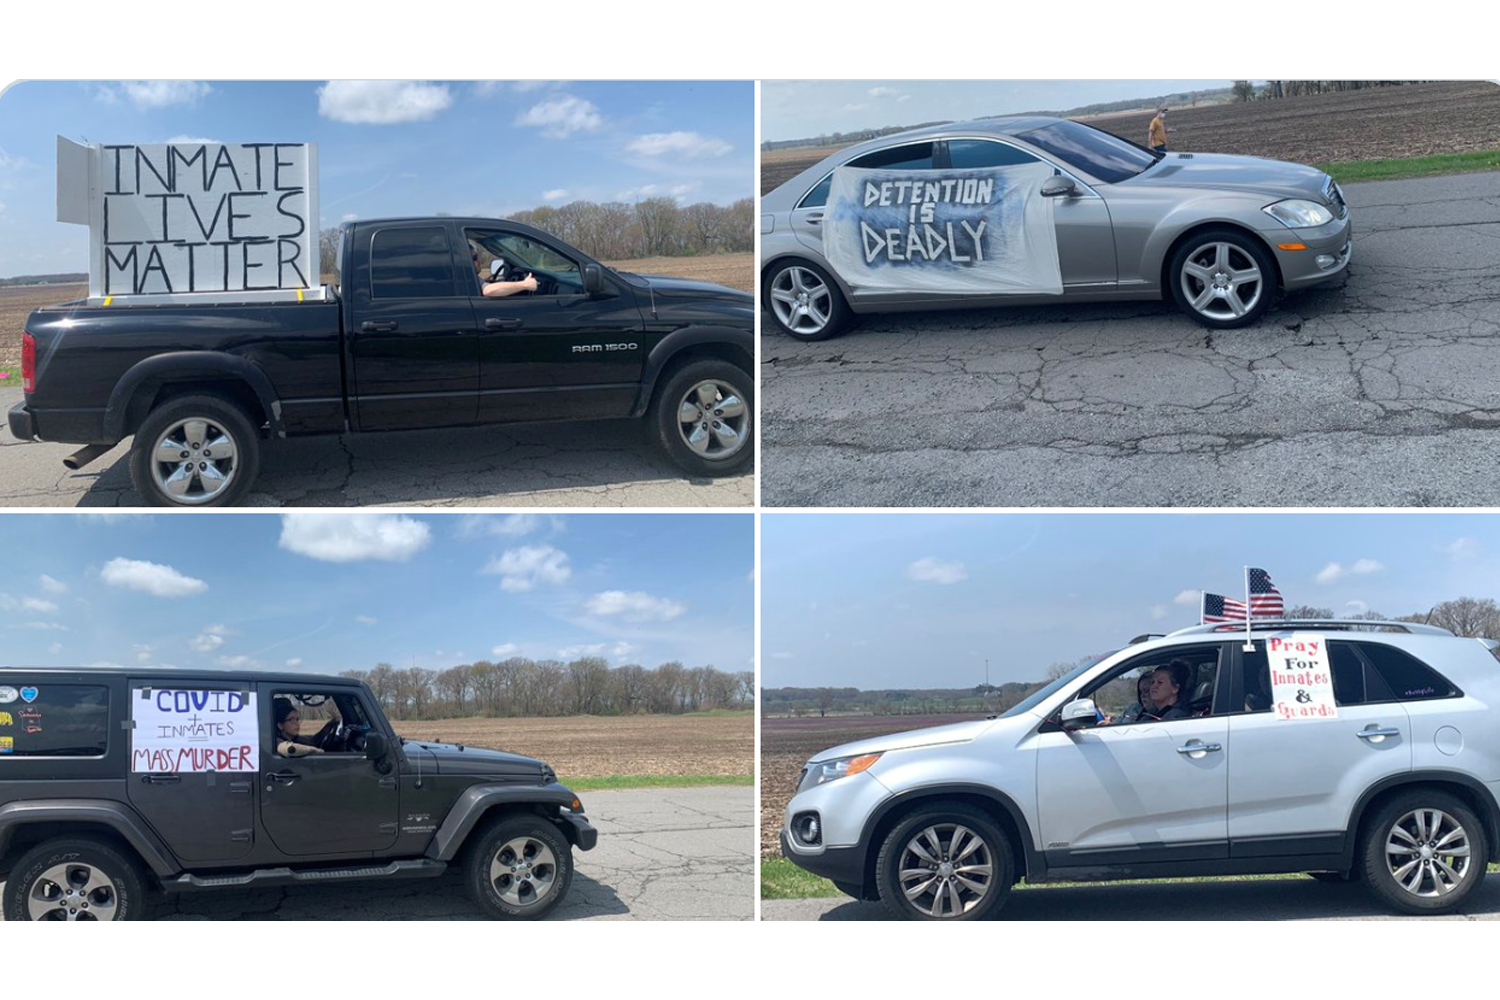 Images of protestors outside the Westville Correctional Facility Apr. 28, 2020.